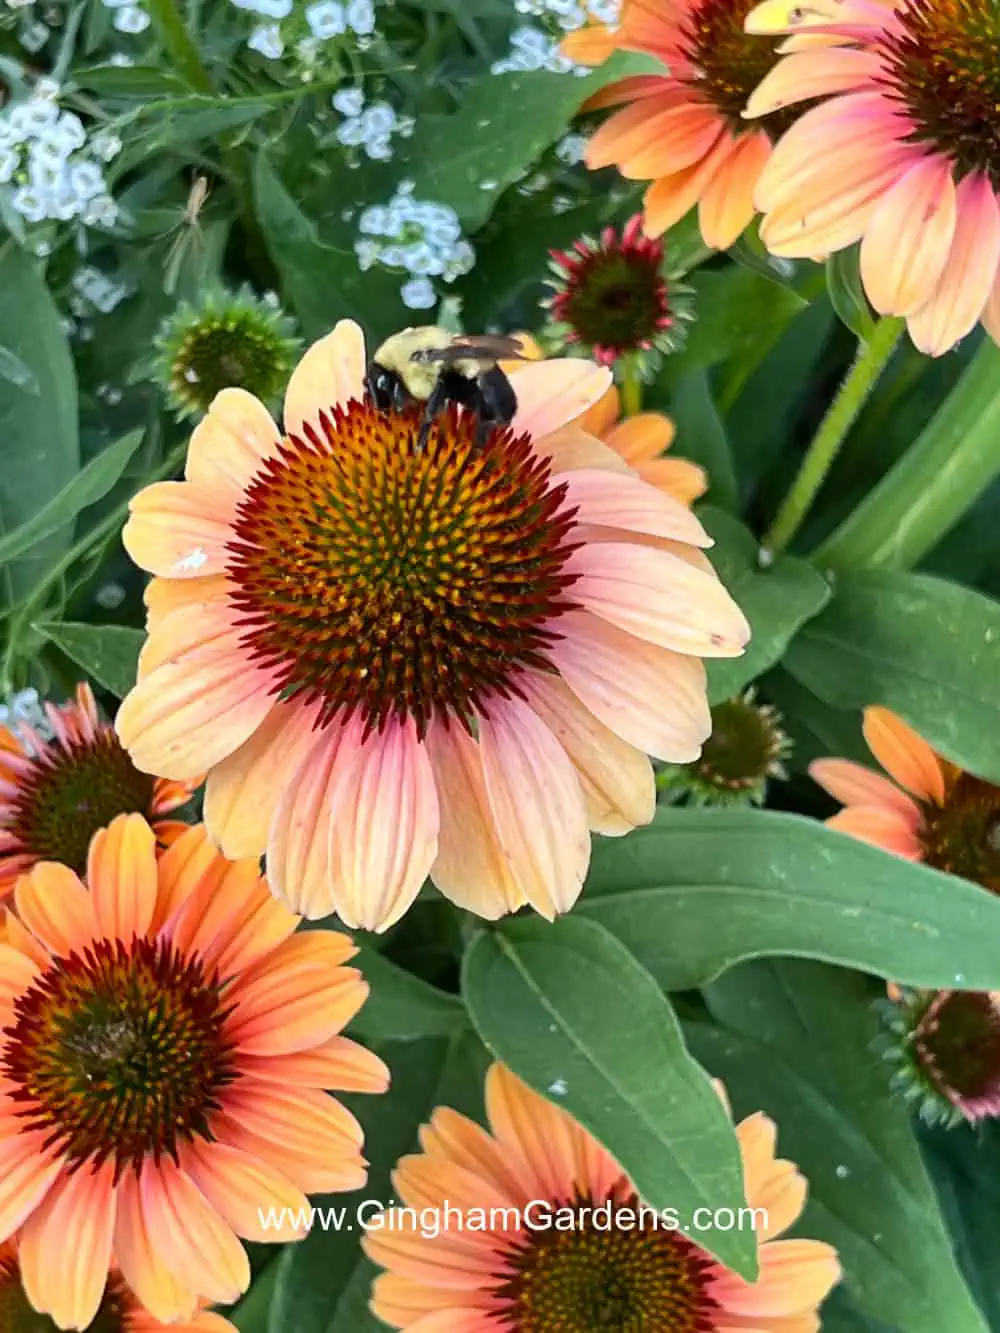 Bee on Coneflower in How to Attract Pollinators to Your Garden